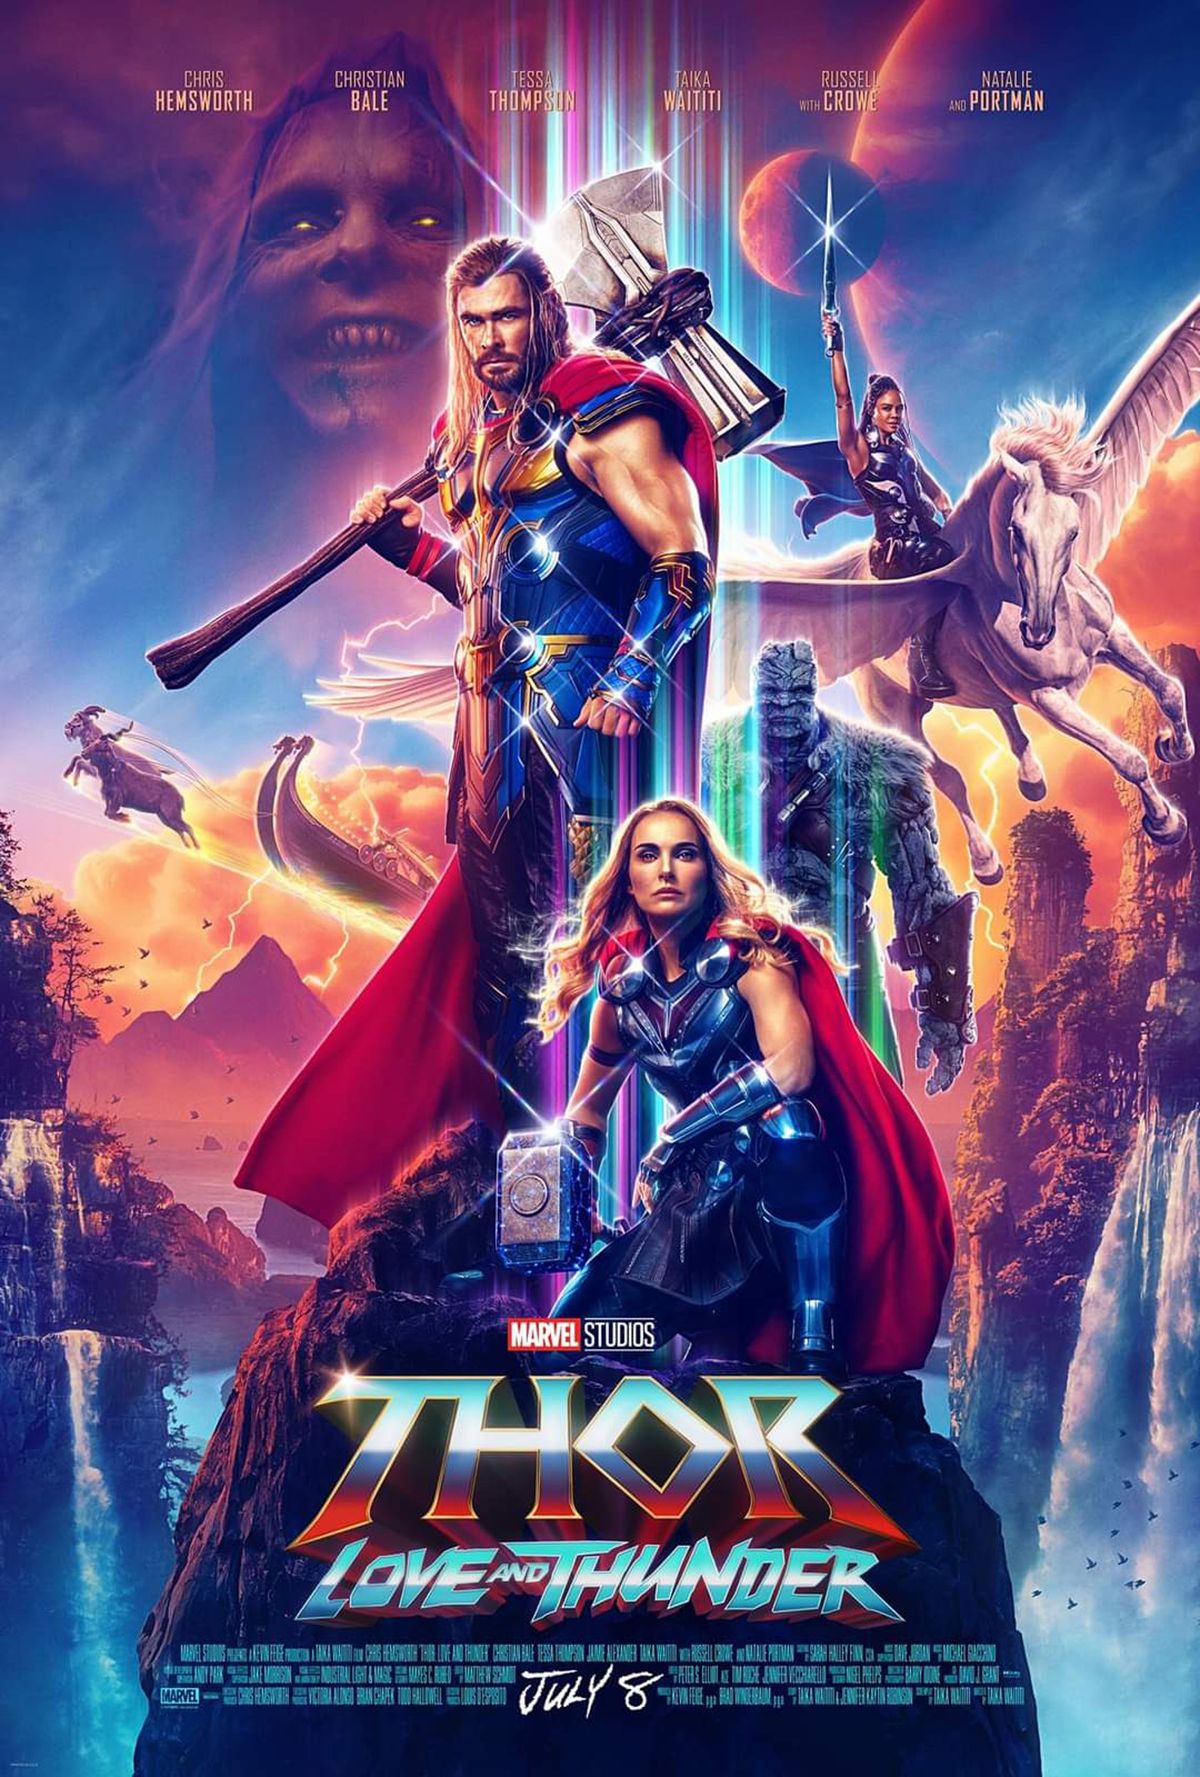 thor-love-and-thunder-poster-2-fotogramas-1653469014